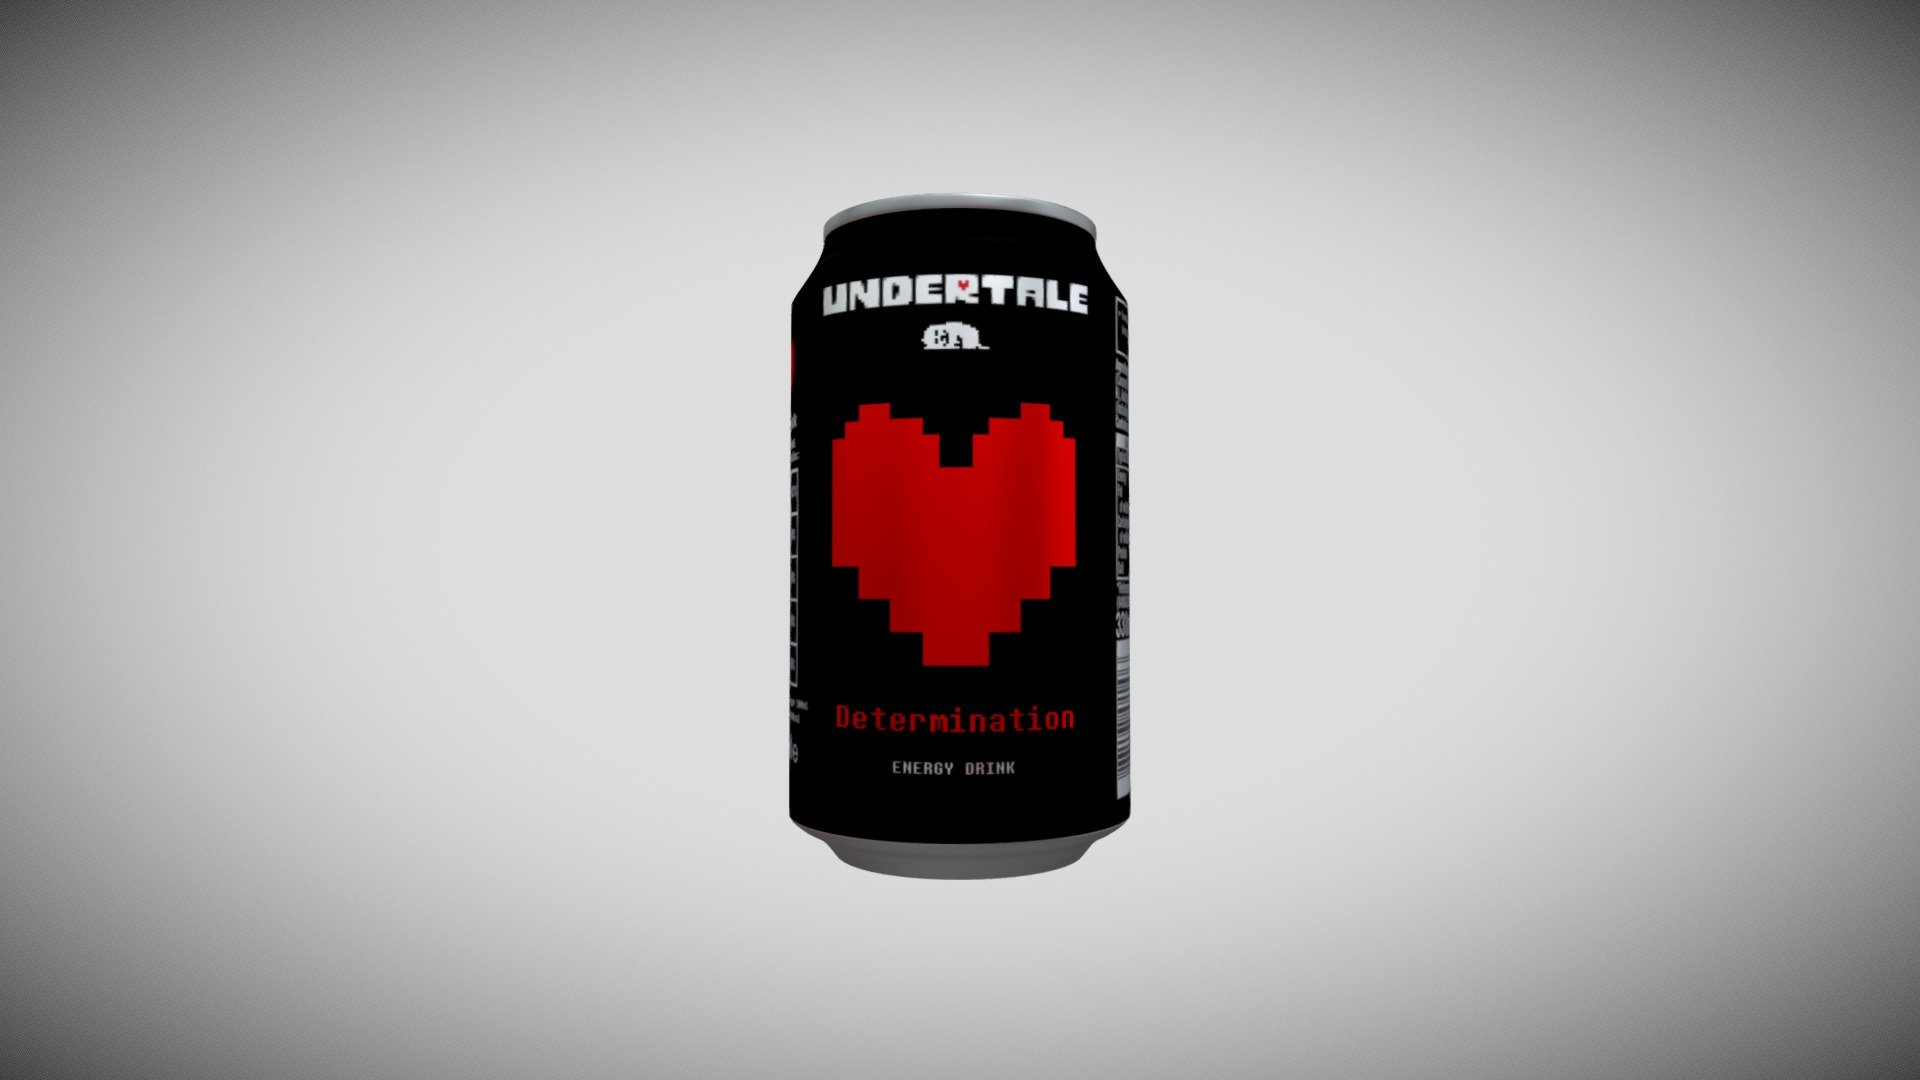 3D model of a 330 ml can of Undertale based Energy Drink - Determination 3d model